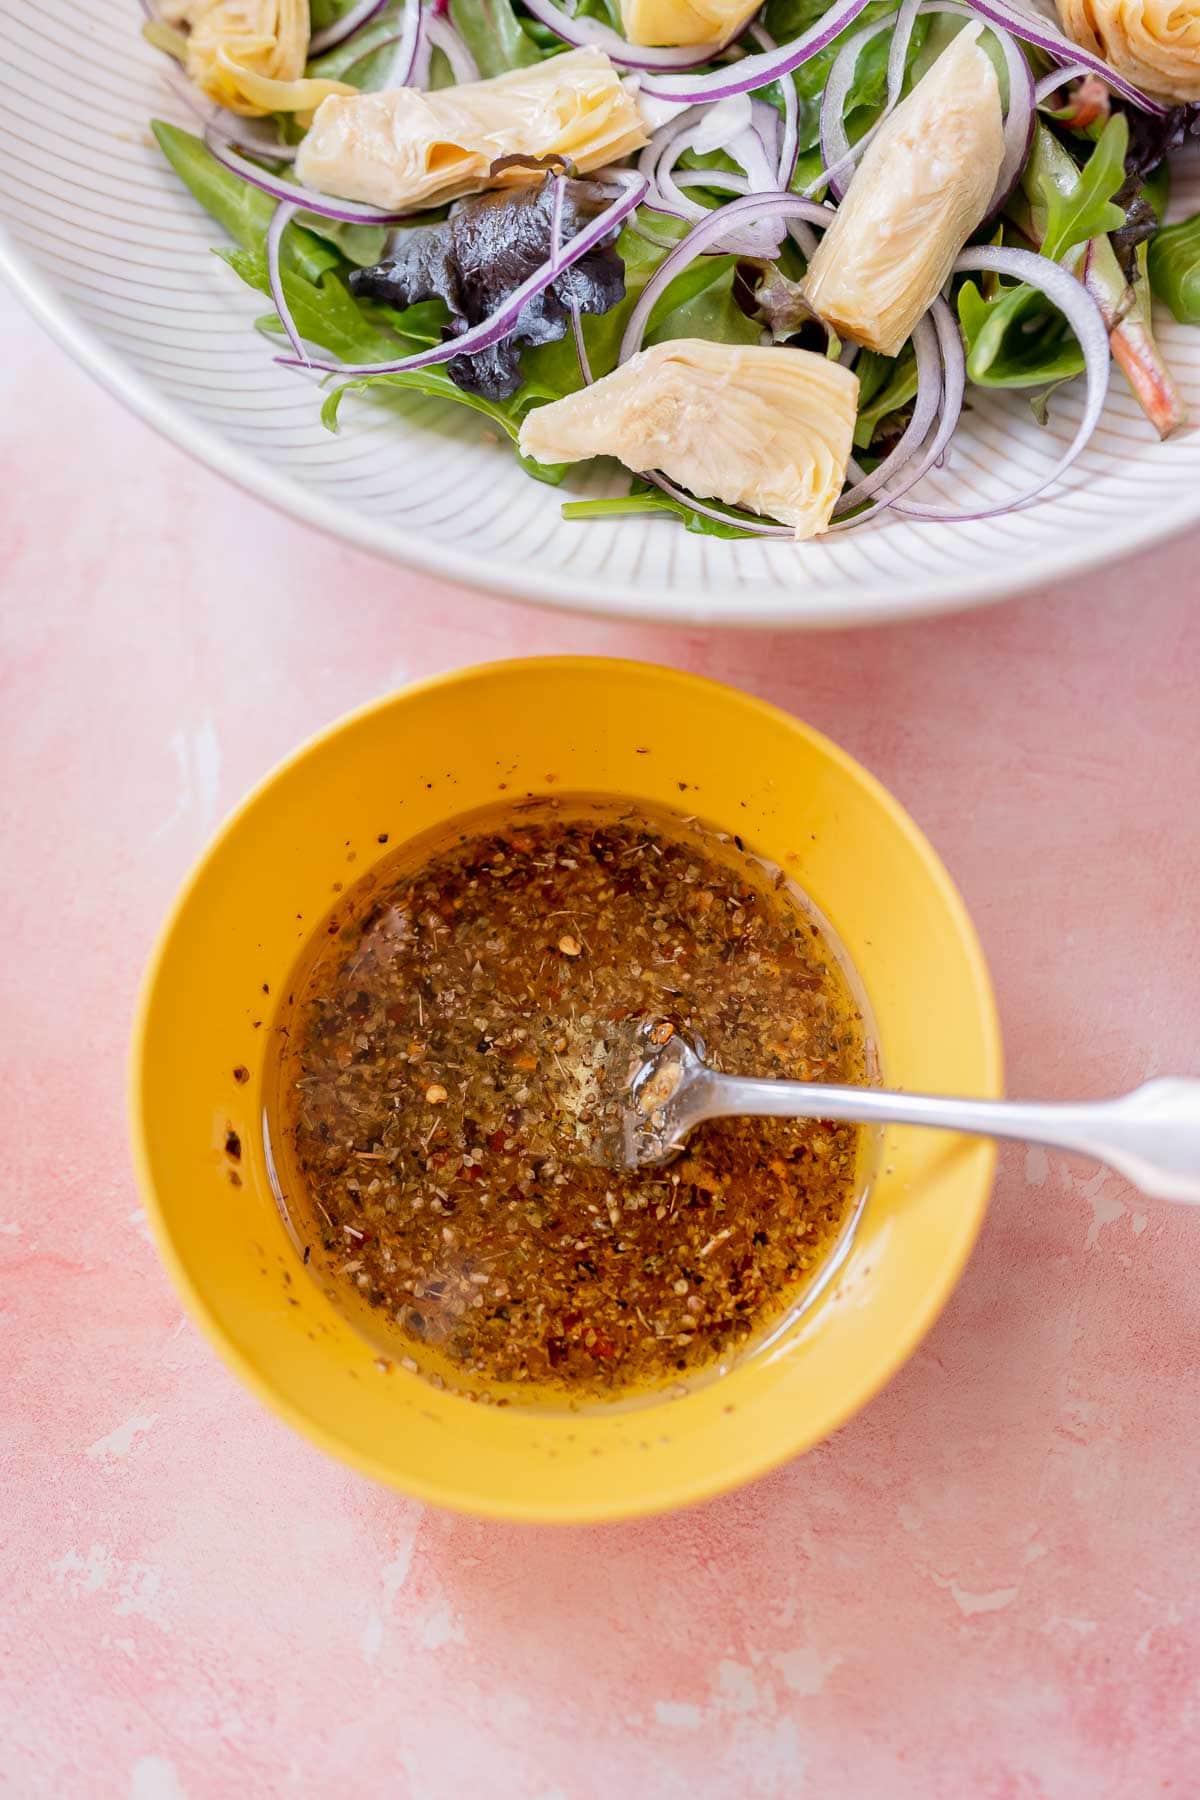 A small yellow bowl of salad dressing ingredients resting on a pink table next to a large bowl of salad.